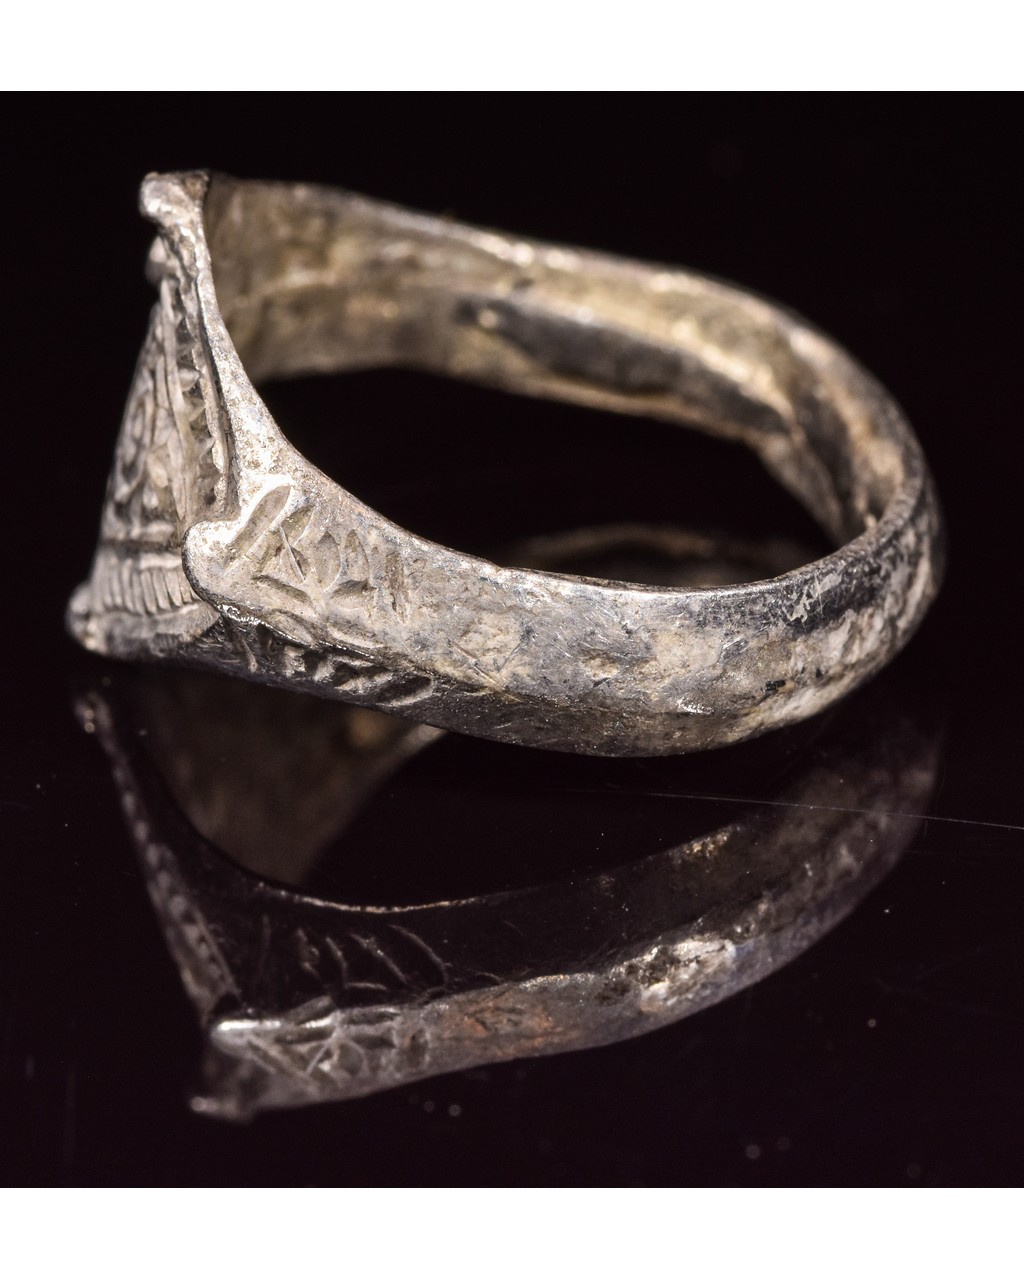 VIKING SILVER RING WITH RUNIC SYMBOL - Image 2 of 4